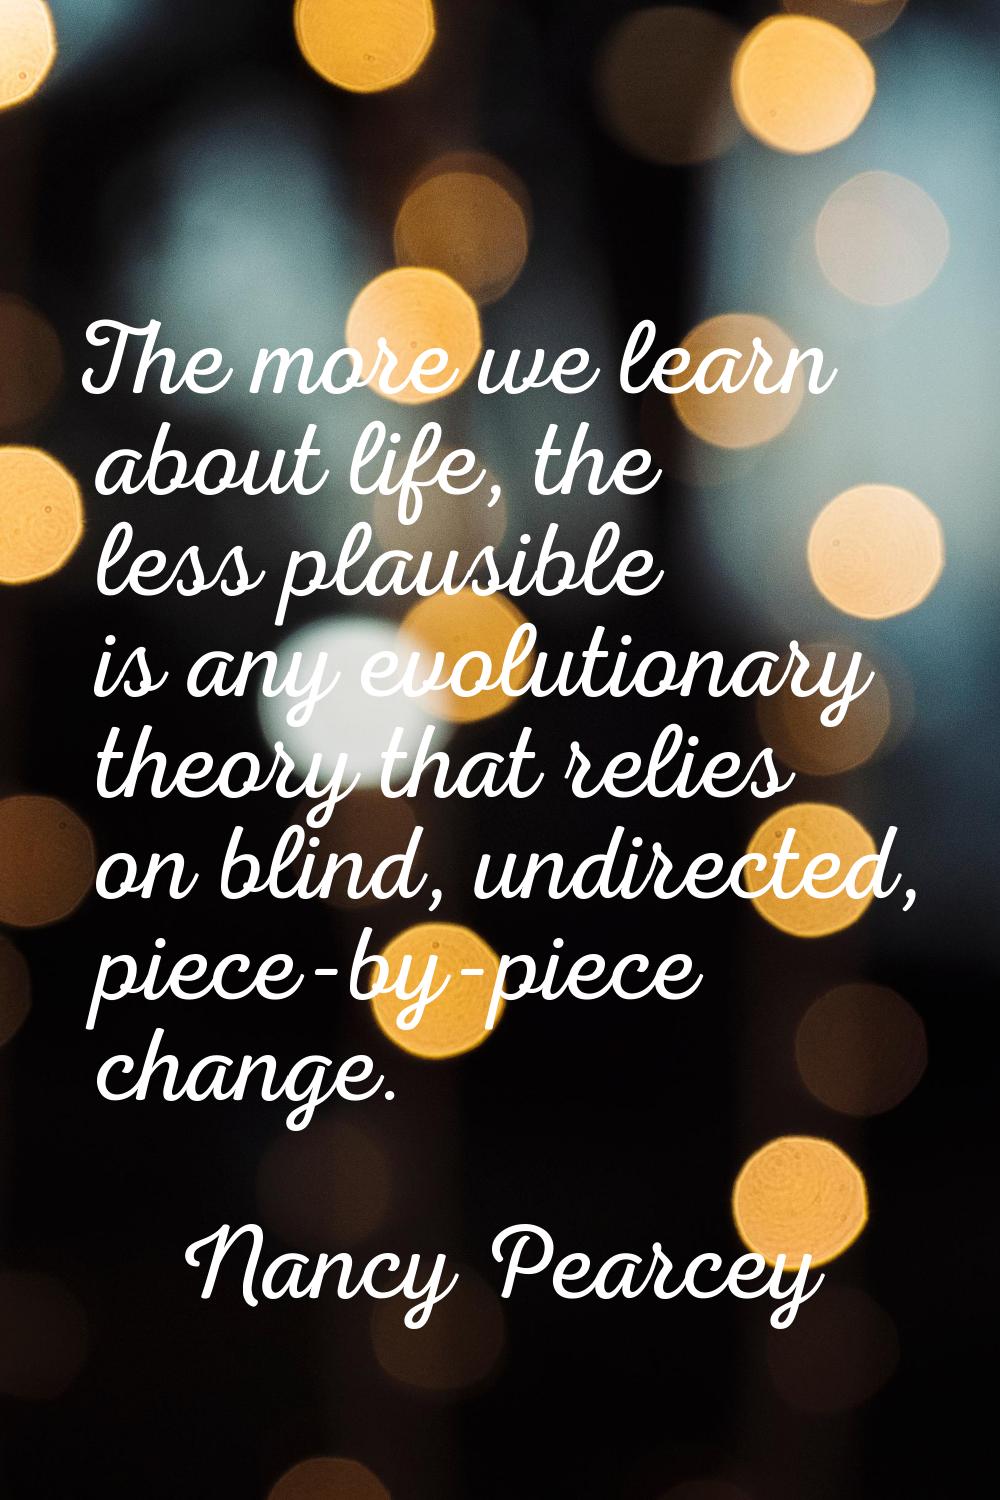 The more we learn about life, the less plausible is any evolutionary theory that relies on blind, u